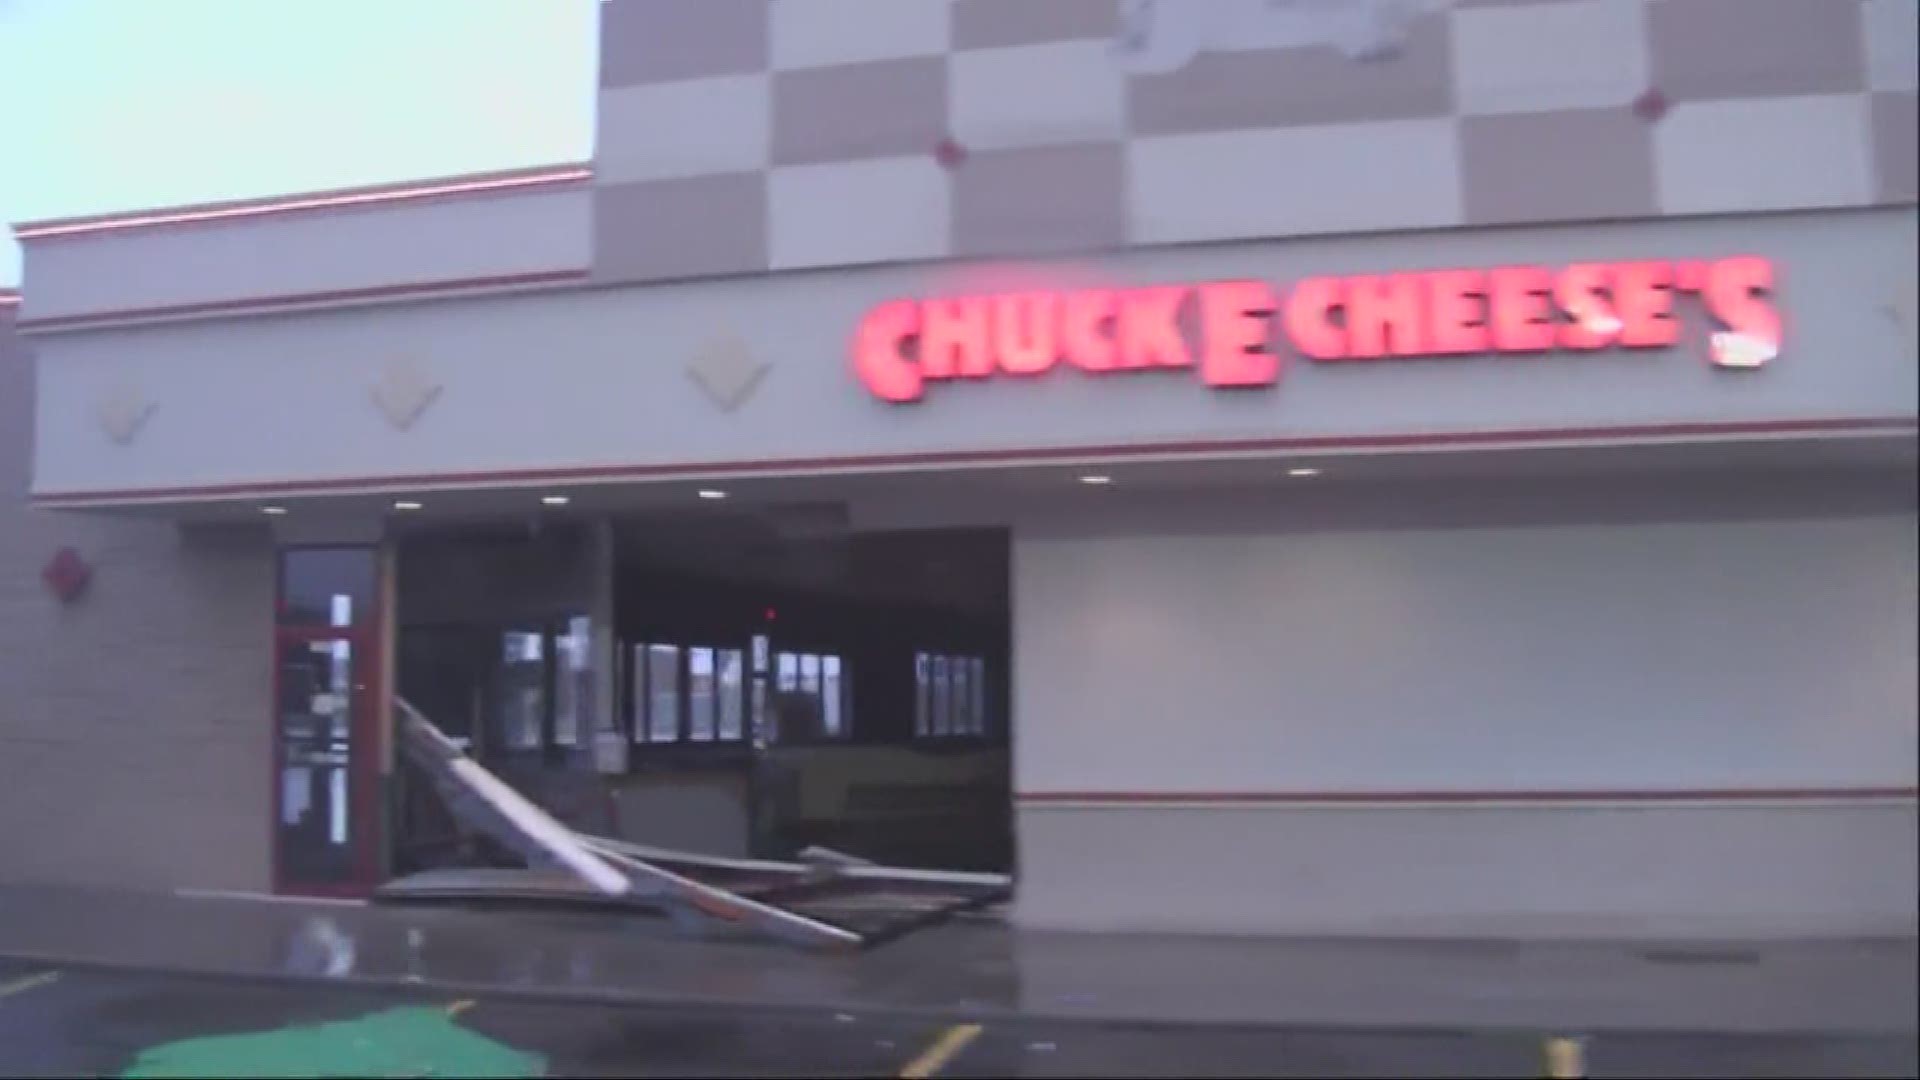 While structure damage around Corpus Christi appears to be minimal, some buildings including Chuck E. Cheese weren't as lucky. (8/26 7:30 am)